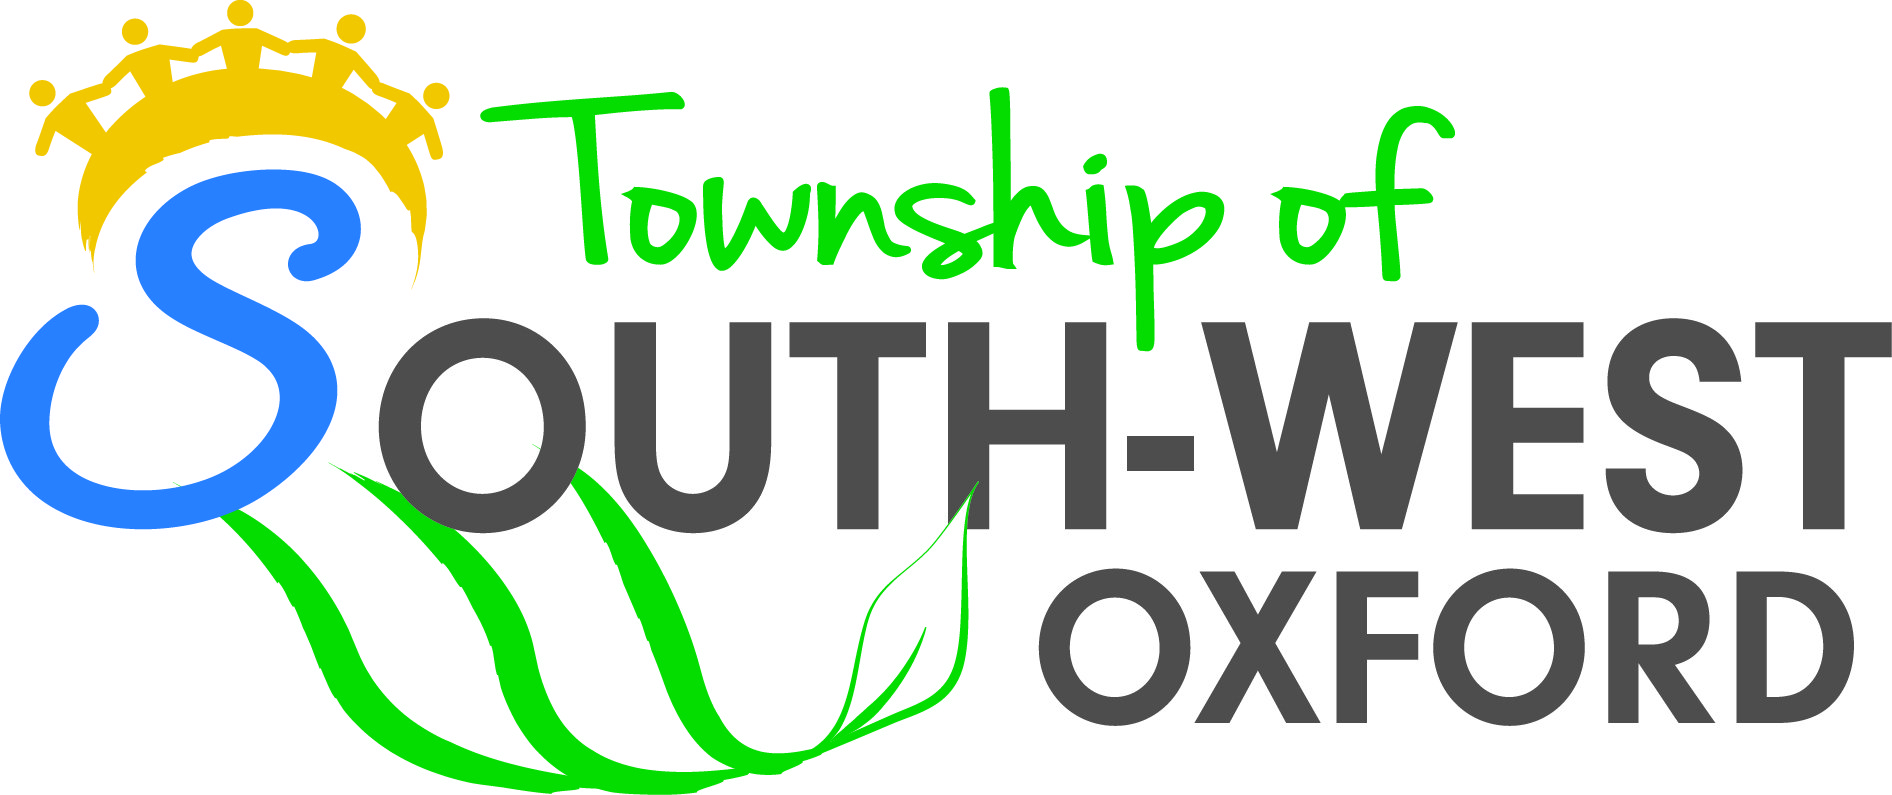 Township of South-West Oxford Logo